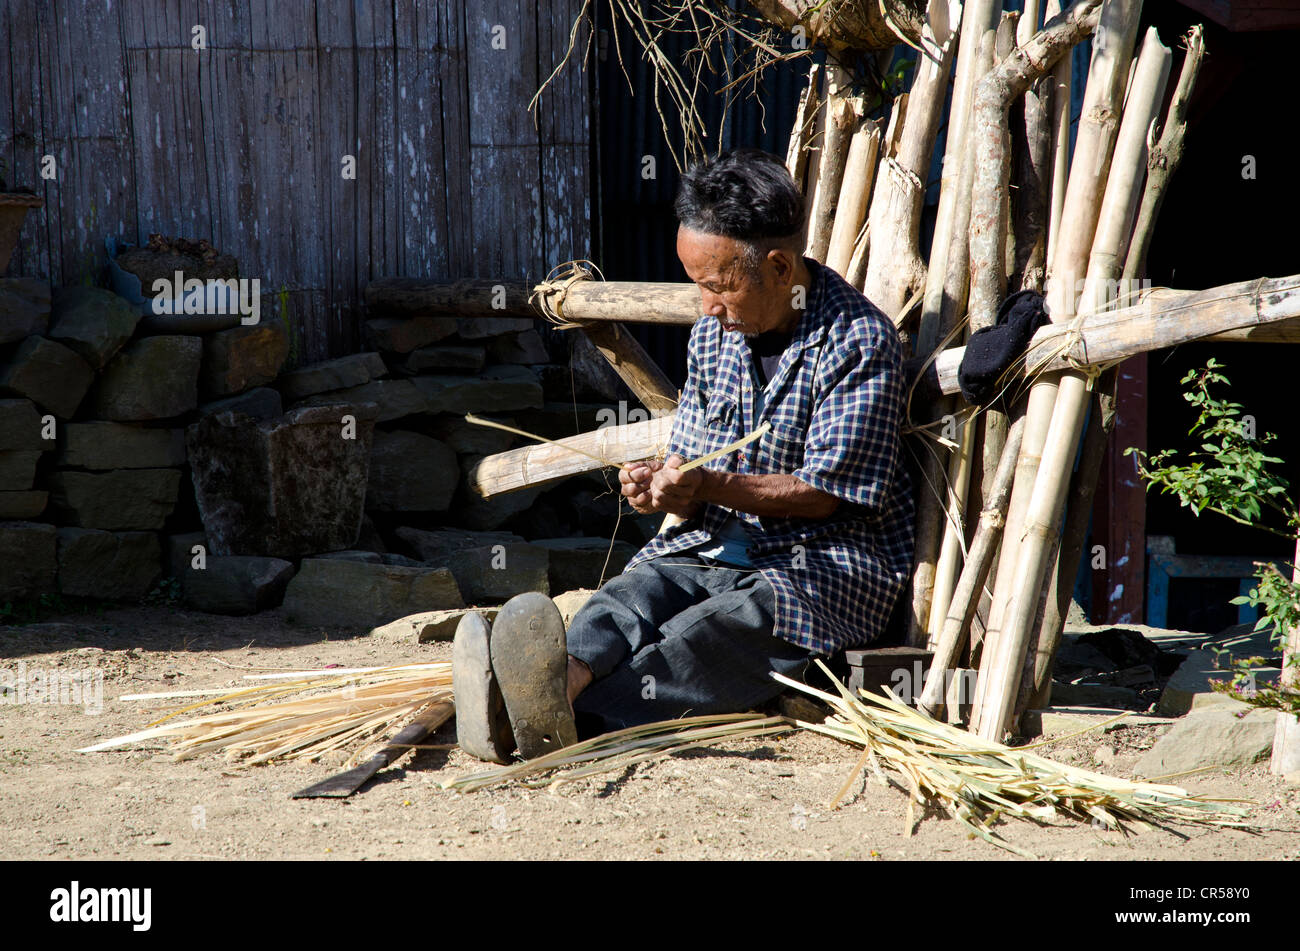 Man of the Ao tribe braiding in front of his house, Ungma village, Nagaland, India, Asia Stock Photo